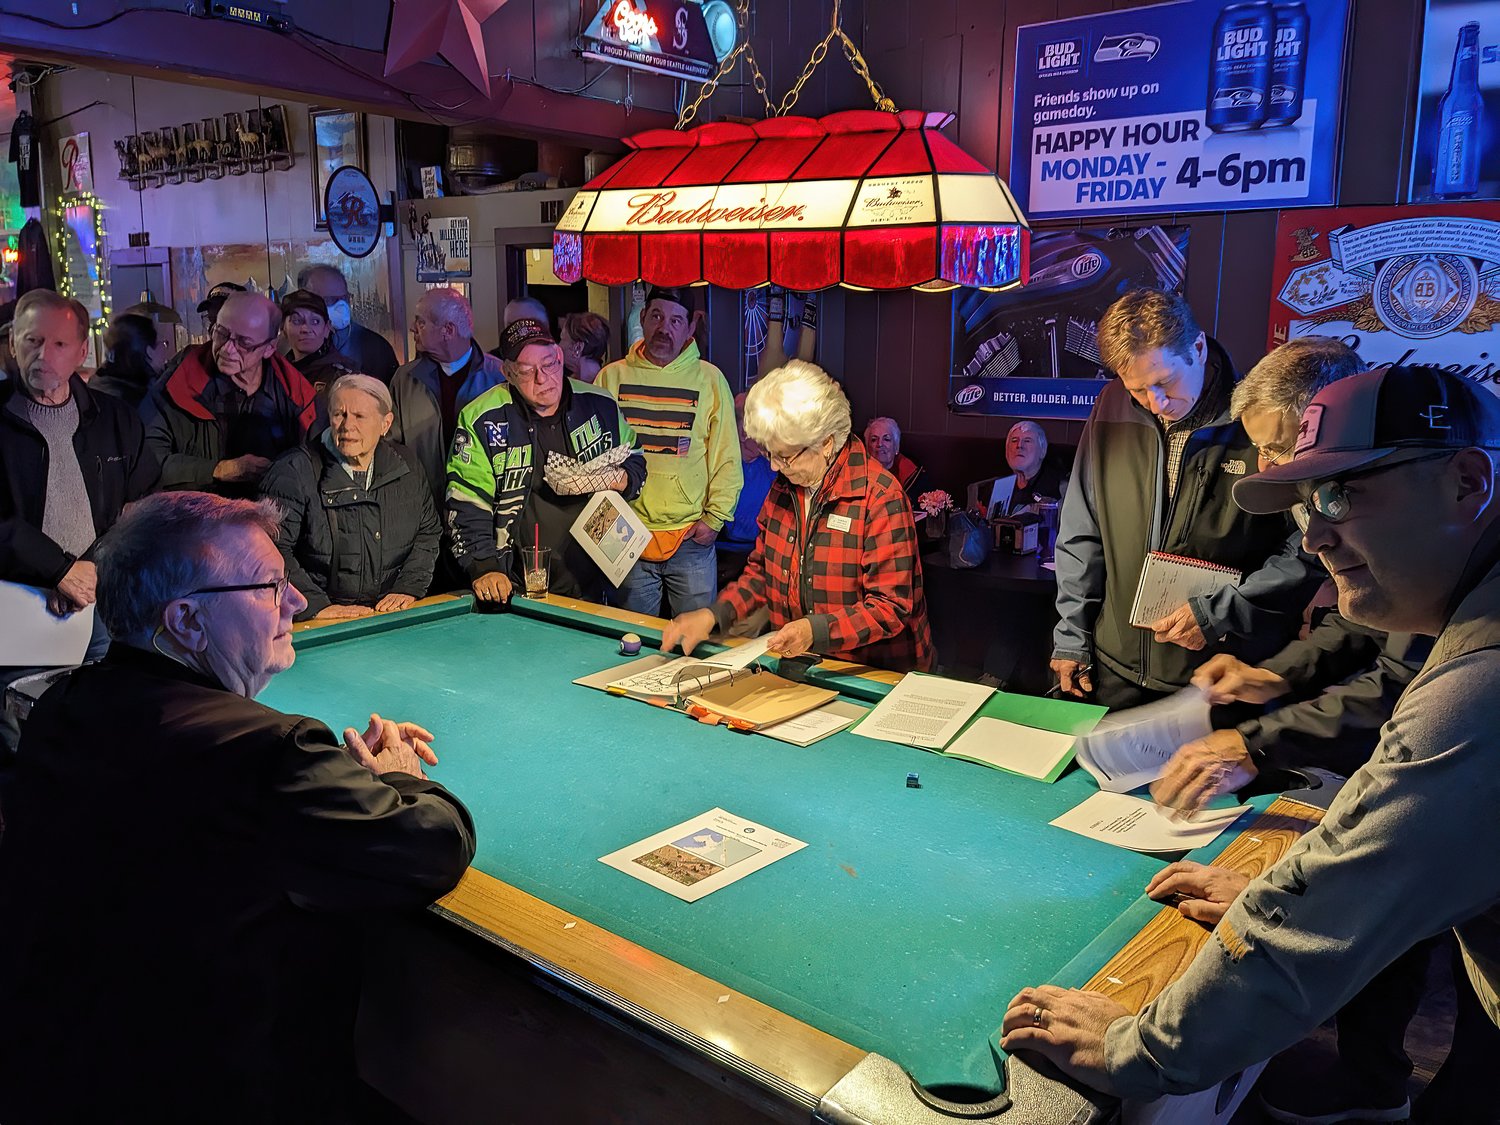 Whatcom County councilmember Ben Elenbaas (r.), Birch Bay residents and Whatcom County Public Works Department staff huddle around a pool table at Tony’s Tavern to discuss the new Birch Bay stop sign ordinance on March 2.